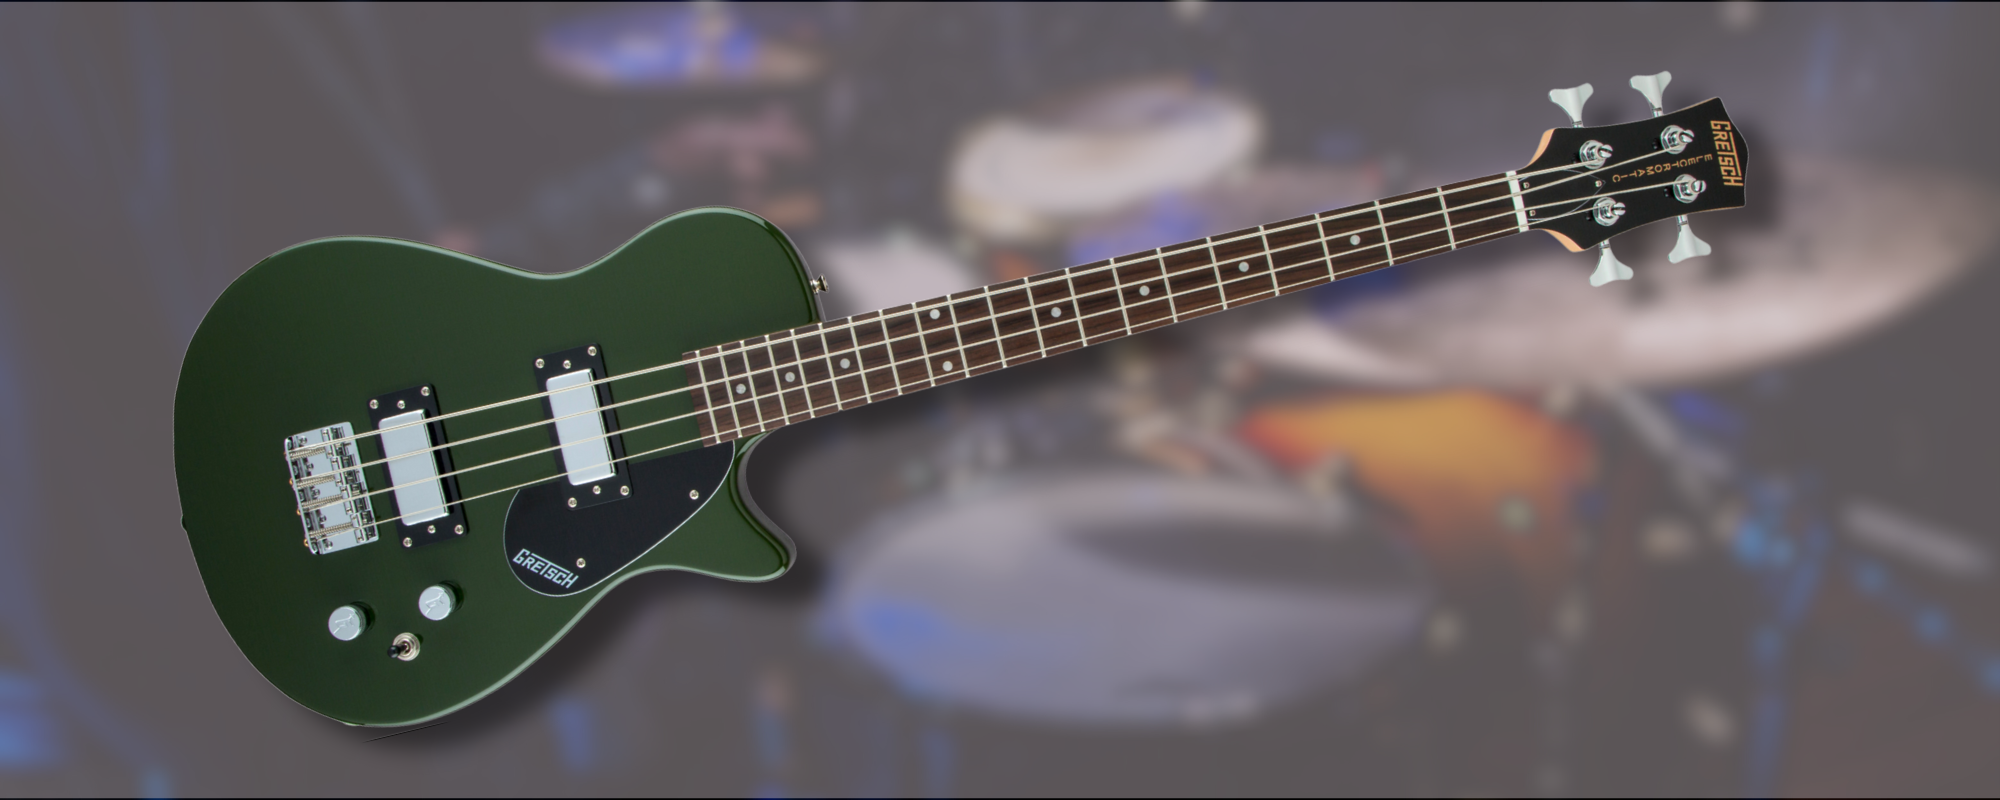 Gretsch G2220 Junior Jet Bass II Review: Stylish, Vintage-Inspired Short-Scale